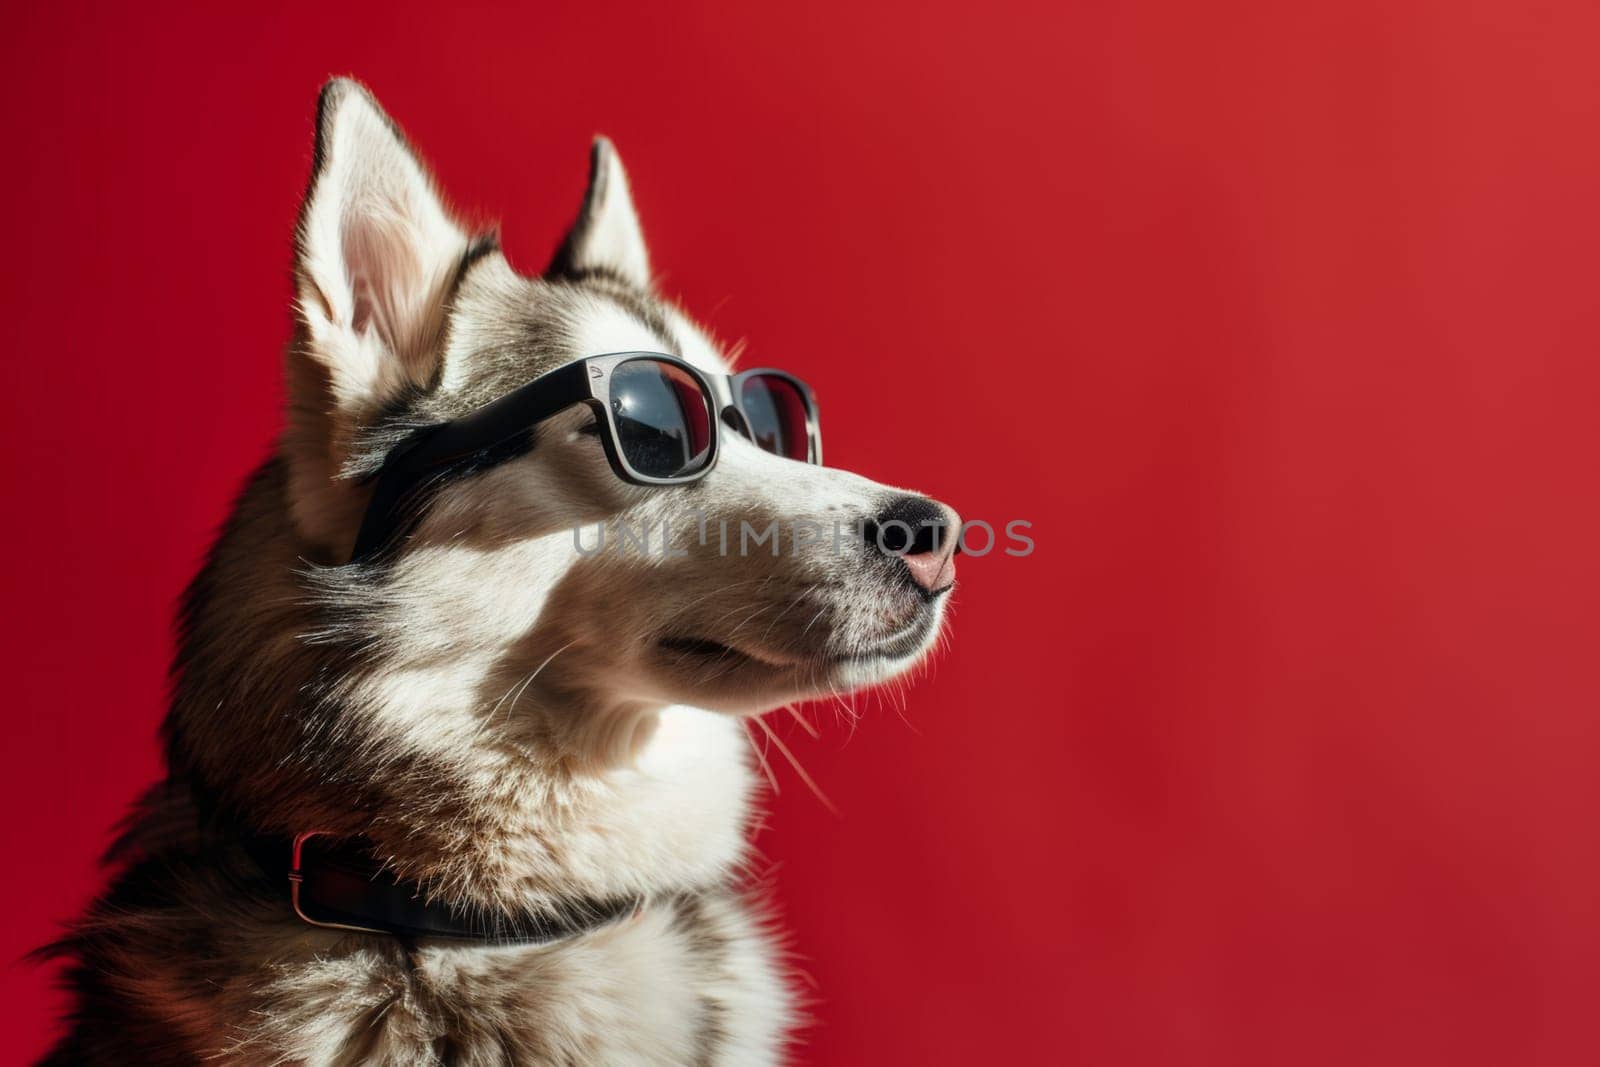 Husky dog wearing sunglasses and standing isolated on red background.